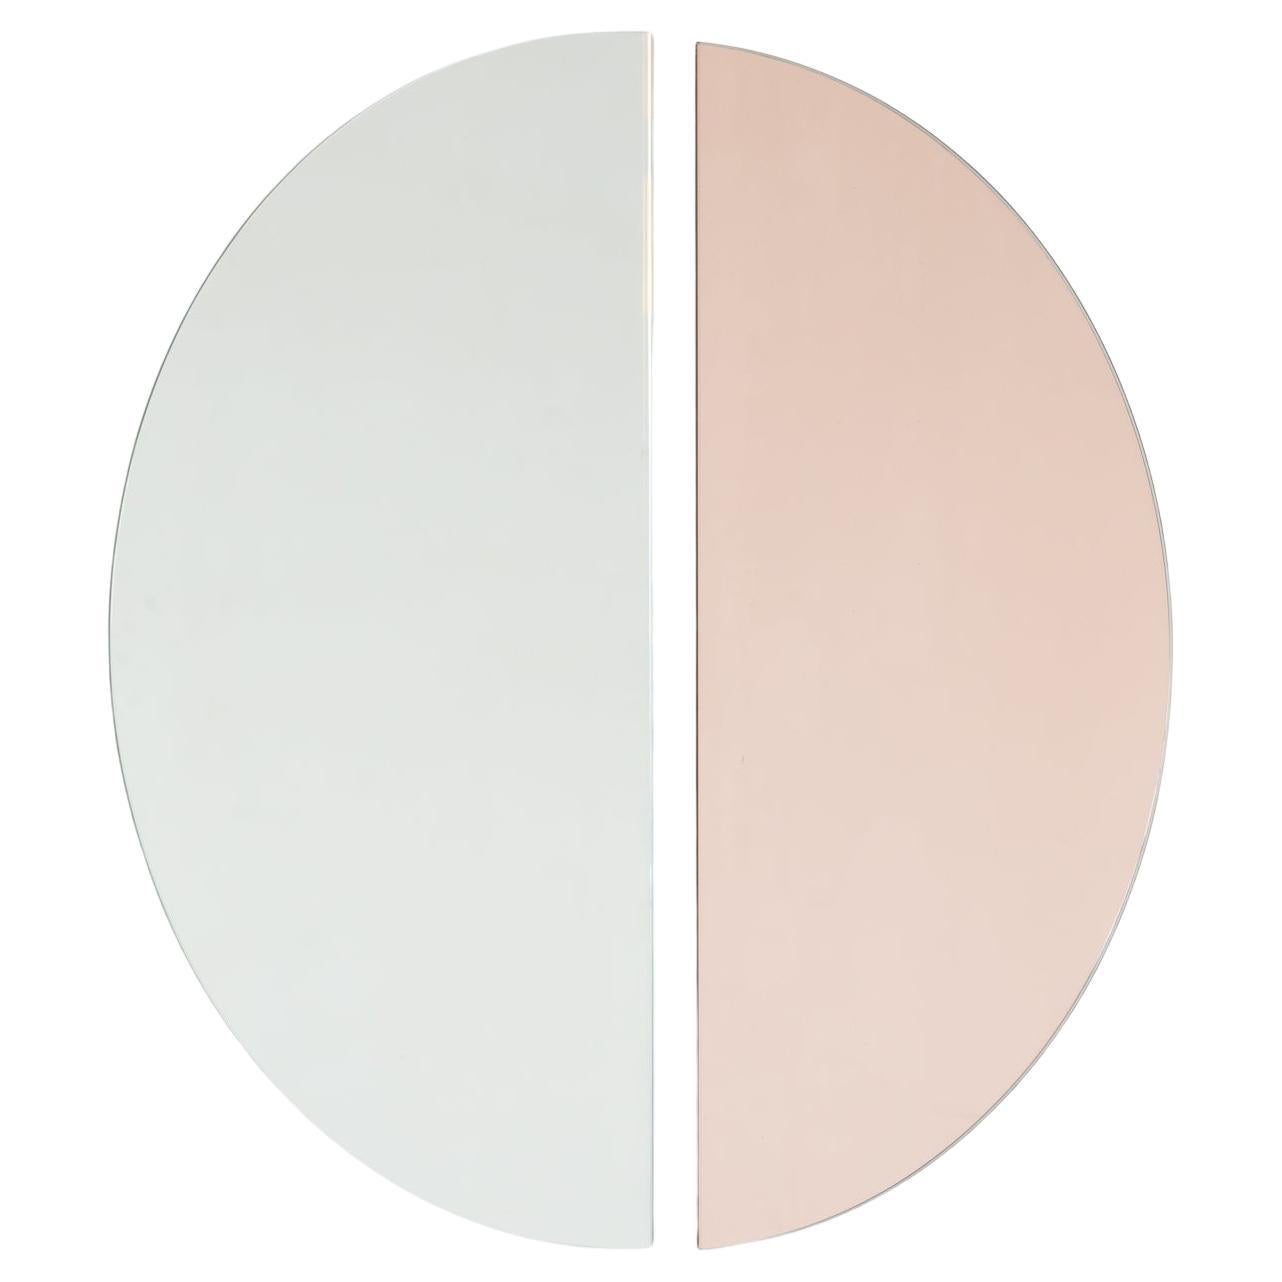 Set of 2 Luna Half-Moon Silver + Rose Gold Peach Round Frameless Mirror, Large For Sale